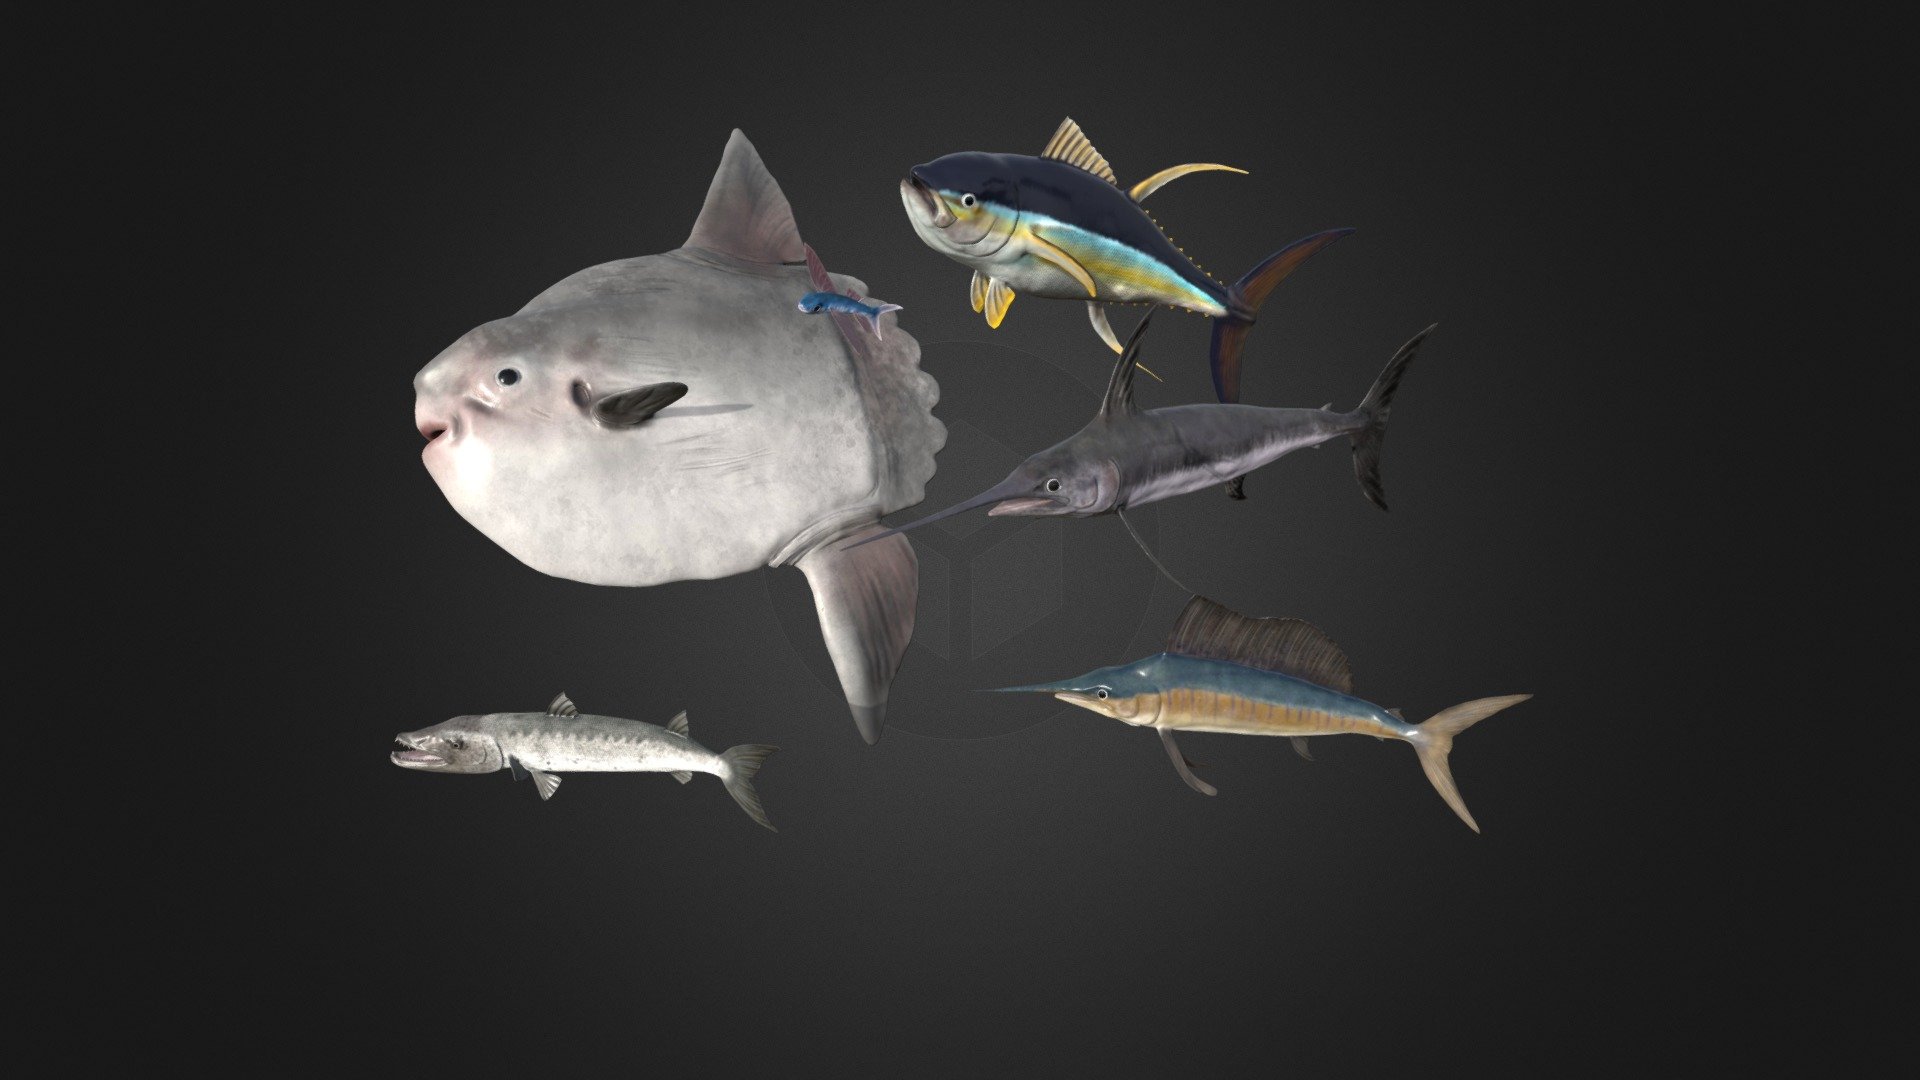 This asset has sea fish pack

Polygon count of :




Barracuda 19600 tris (4100 tris mobile version)

Flying fish 18400 tris (4000 tris mobile version)

Sailfish 17800 tris (3800 tris mobile version)

Swordfish 13750 tris  (3350 tris mobile version)

Sunfish 11950 tris (3300 tris mobile version)

Tuna 15350 tris  (3350 tris mobile version)

All model have 4 LODs.

Texture dimensions: 2048*2048.

You can view each model separately using the links below.
* Barracuda
* Flying fish
* Sailfish 
* Swordfish
* Sunfish 
* Tuna

If you have any questions, please contact us by mail: Chester9292@mail.ru - Sea fish pack - Buy Royalty Free 3D model by Darina3D 3d model